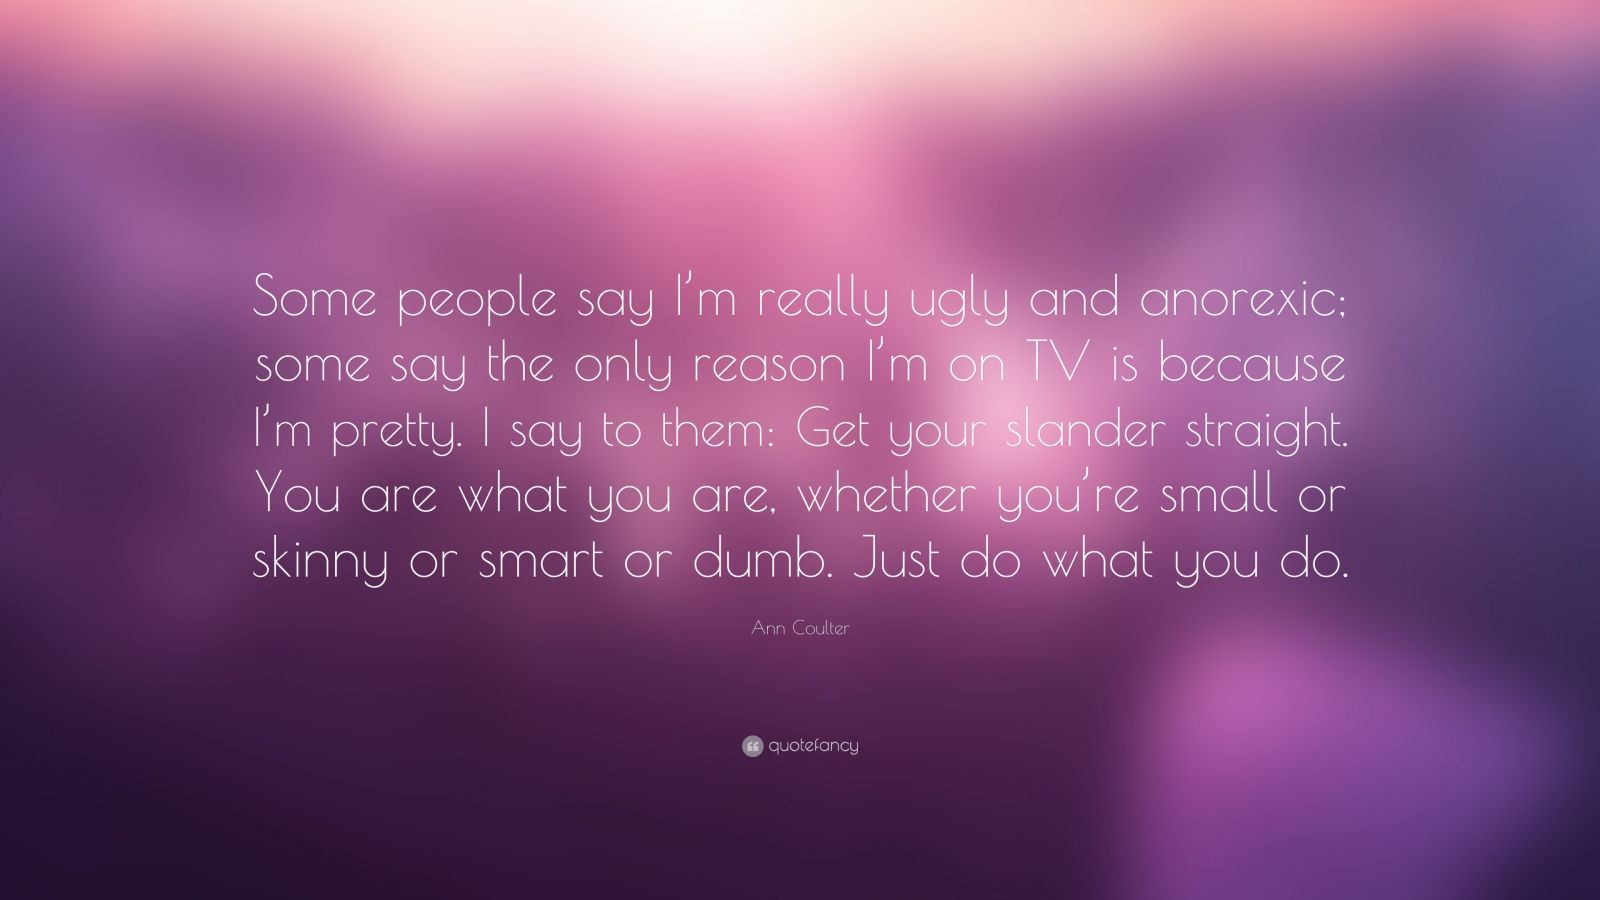 Ann Coulter Quote: “Some people say I’m really ugly and anorexic; some ...